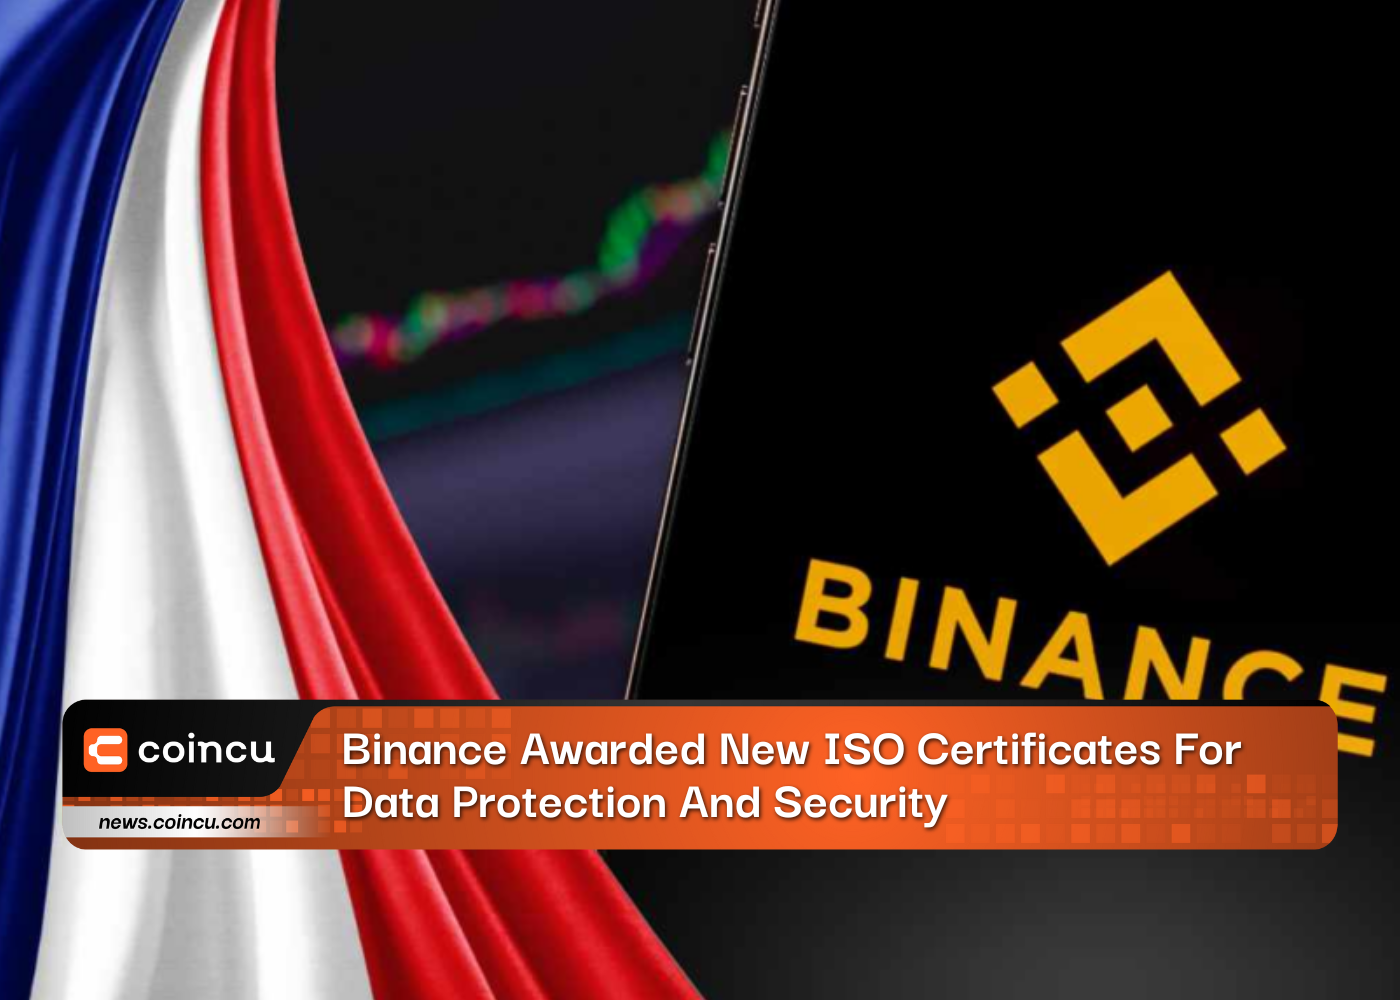 Binance Appoints New VP Of Global Marketing To Reinforce Trusted Crypto Leadership